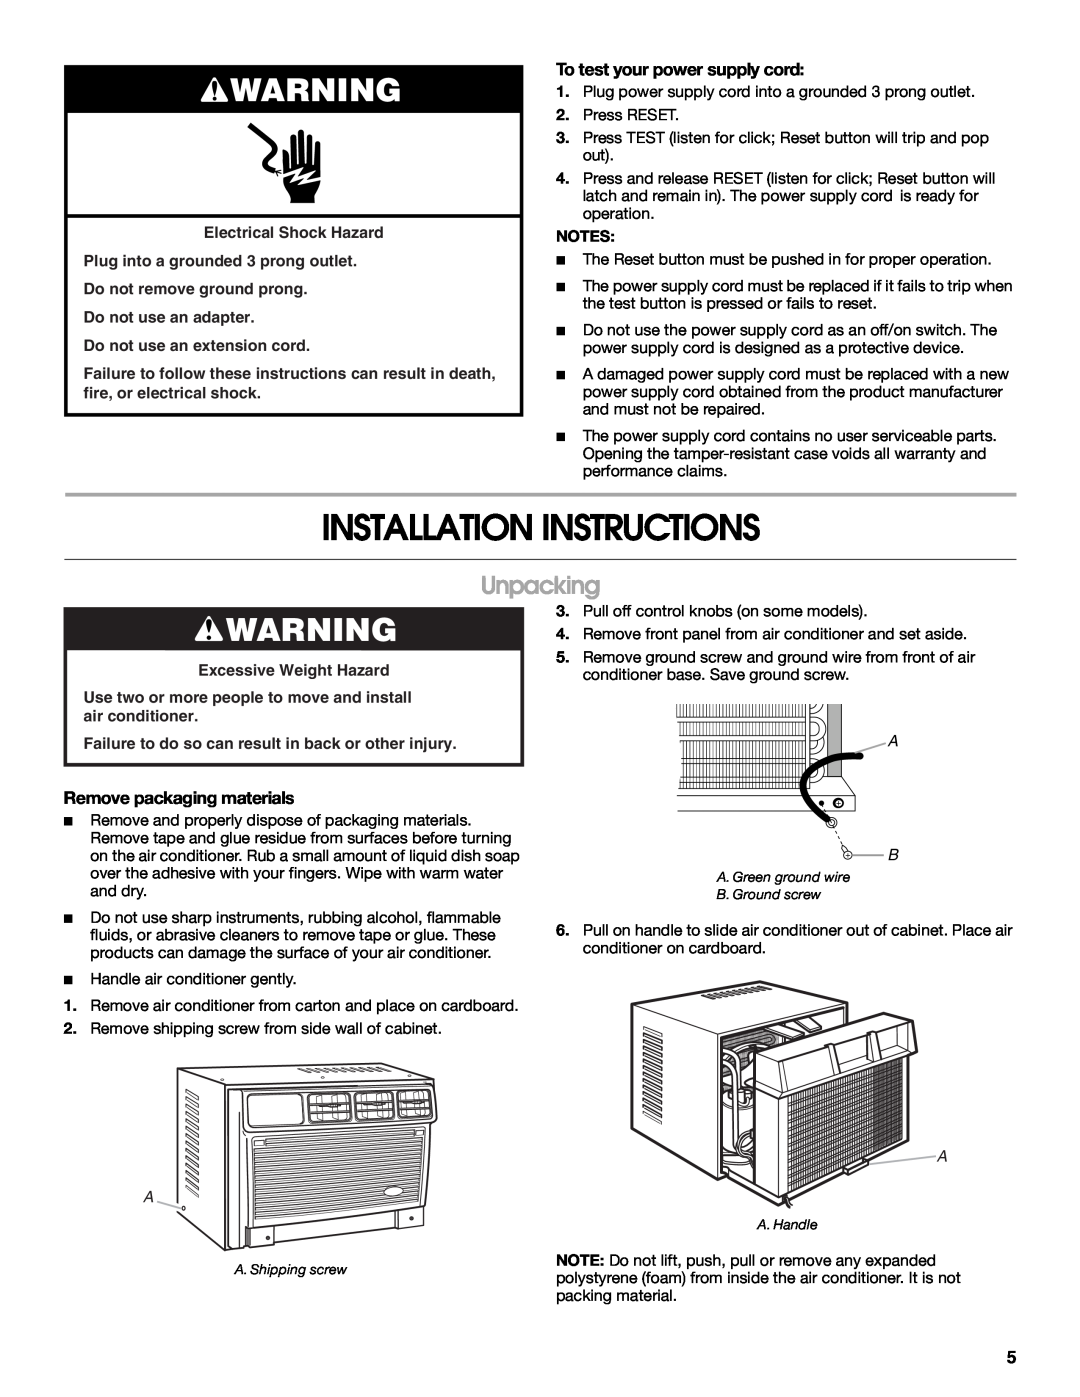 Whirlpool ACE082XR0 manual Installation Instructions, Unpacking, To test your power supply cord, Remove packaging materials 